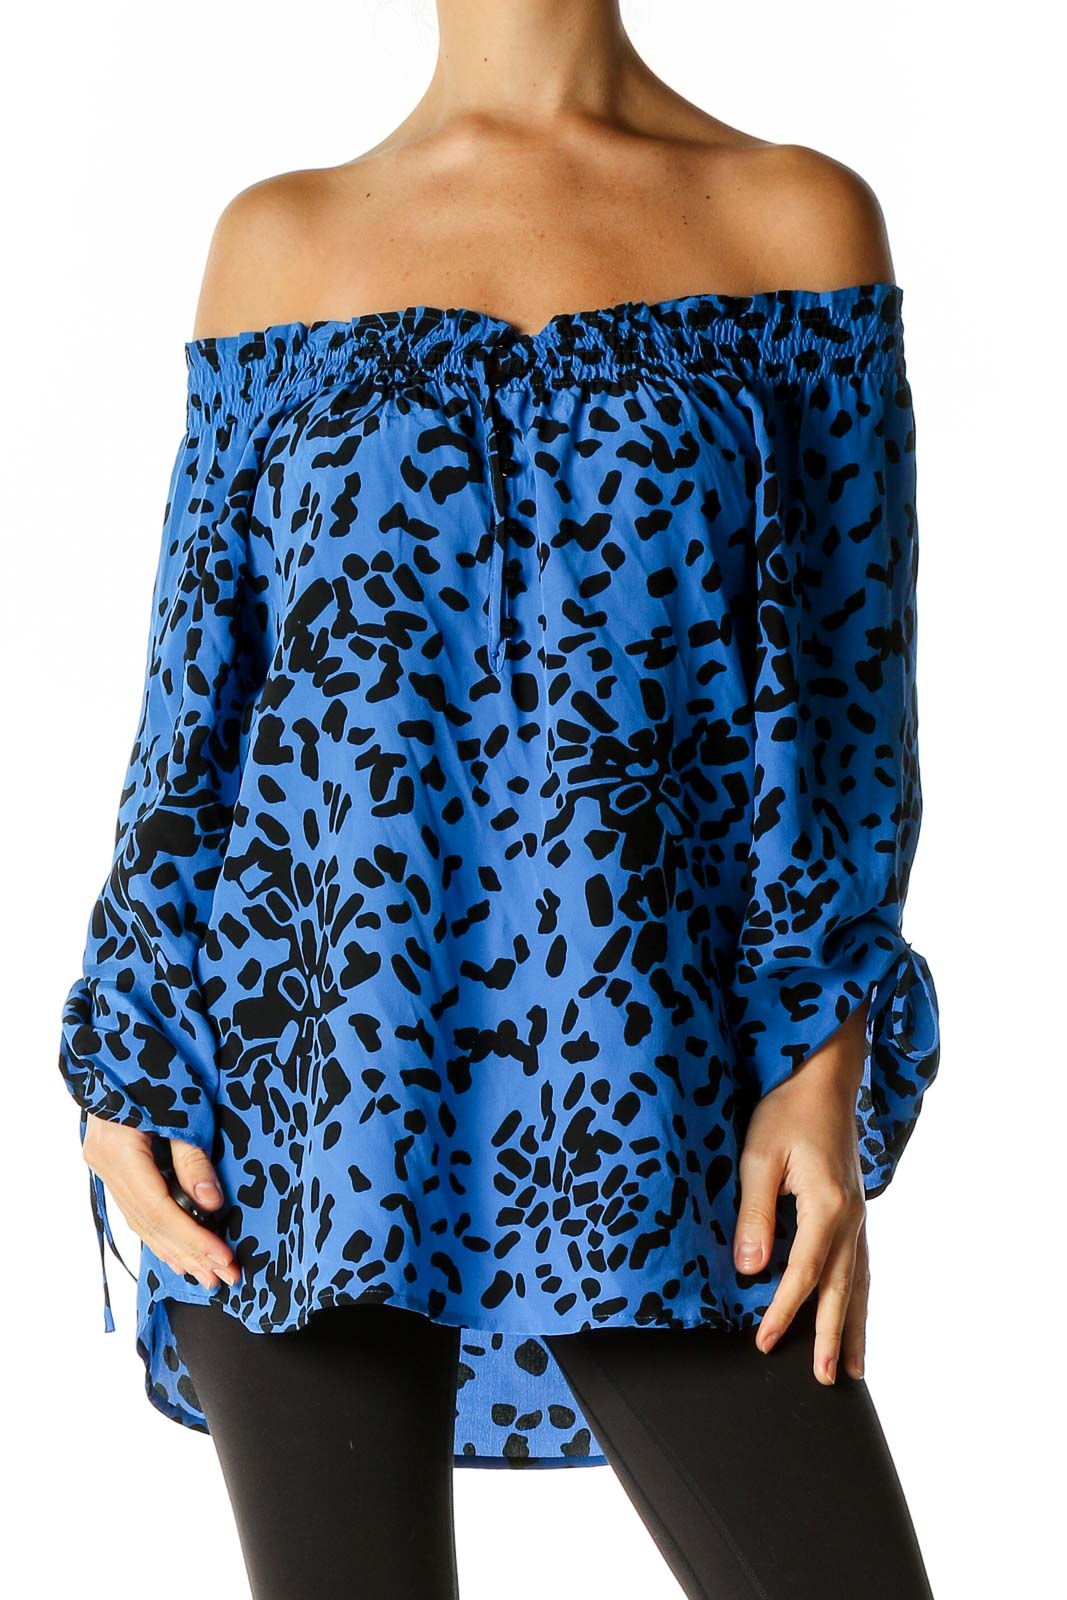 Blue Printed Retro Blouse Front